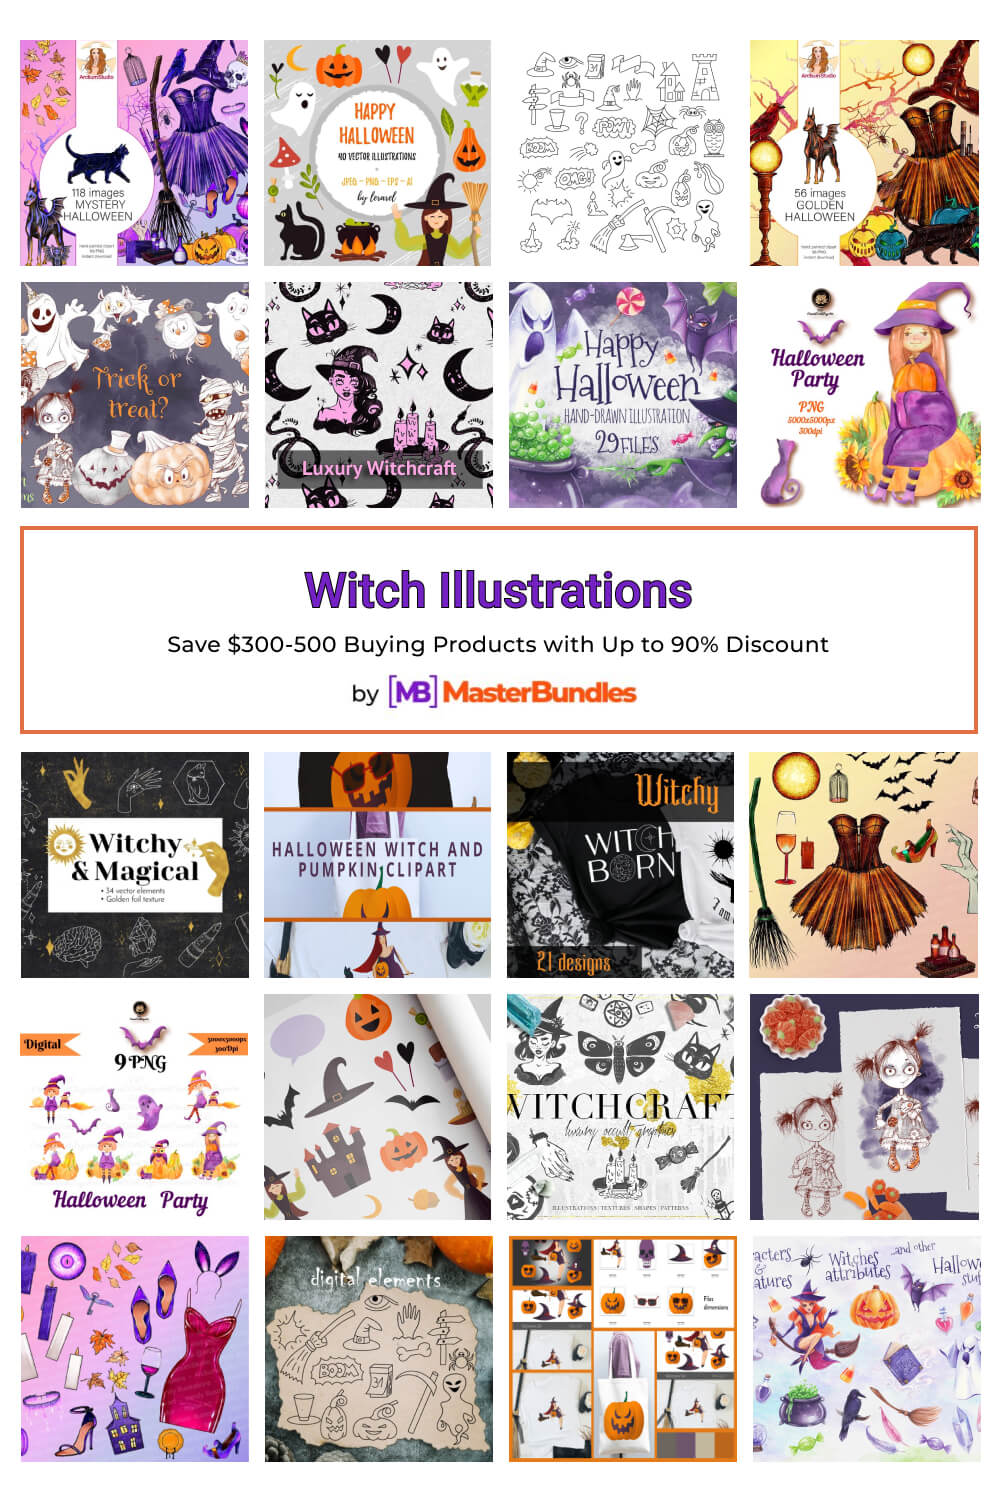 witch illustrations pinterest image.